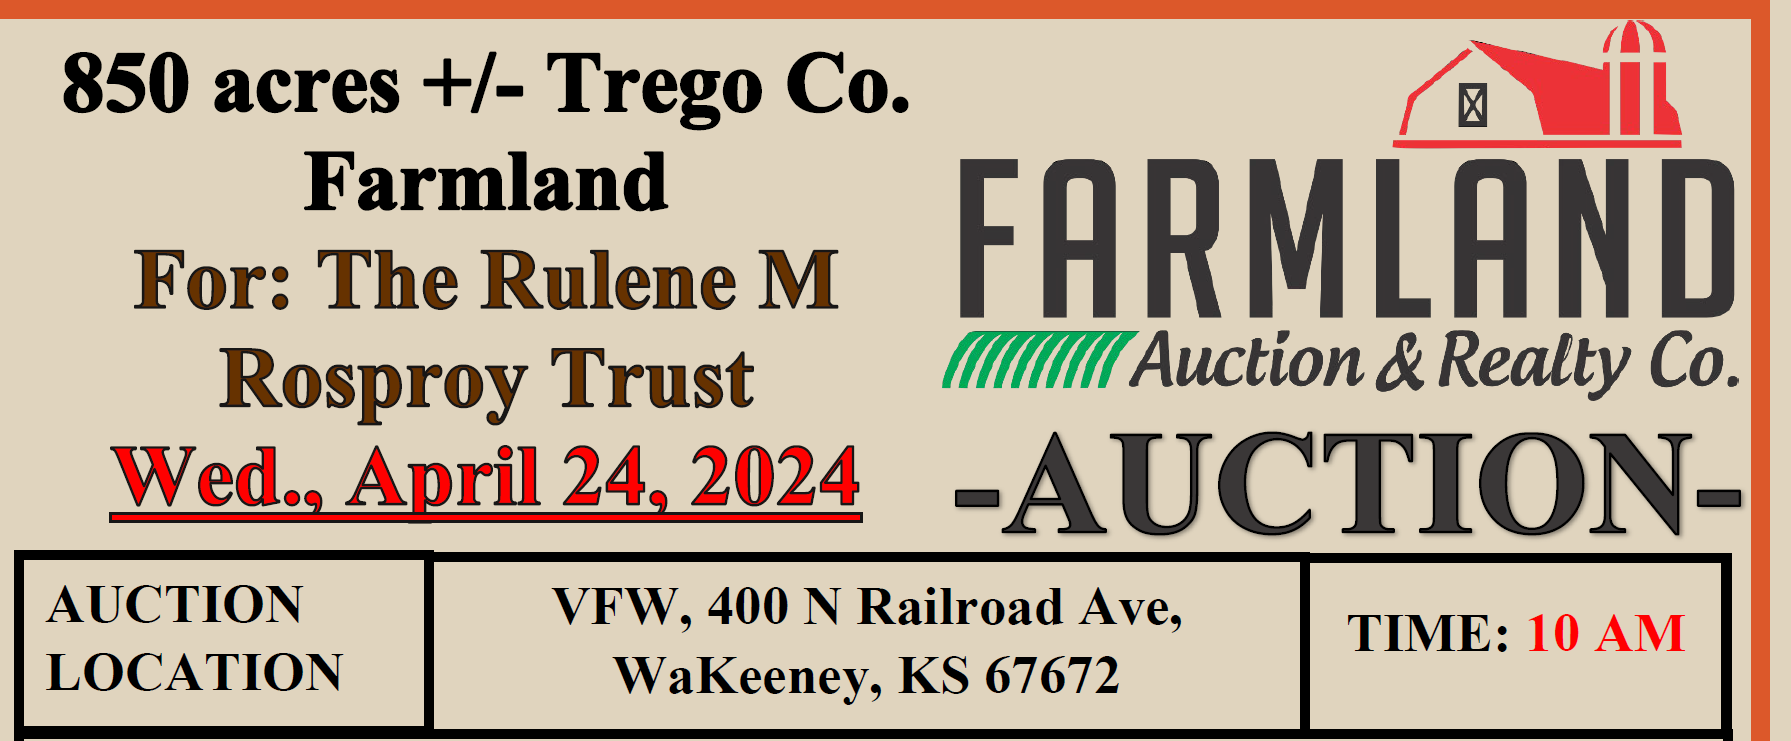 Auction flyer for *UNDER CONTRACT* AUCTION: 850 acres +/- Trego Co. Farmland